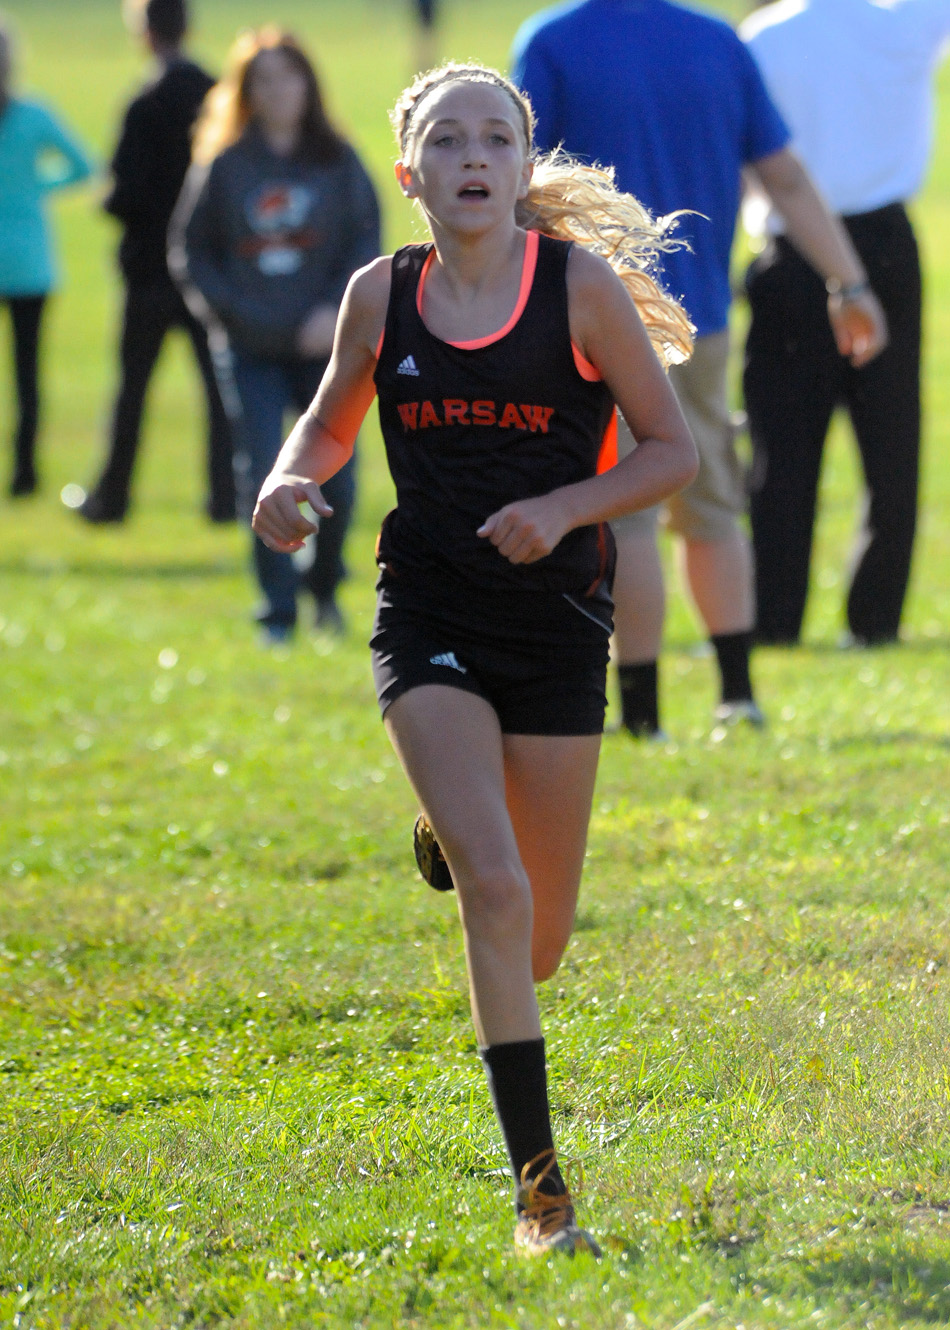 Warsaw's Mia Beckham was the best of the bunch Tuesday in the dual with Wawasee, winning with a time of 20:11. (Photos by Mike Deak)